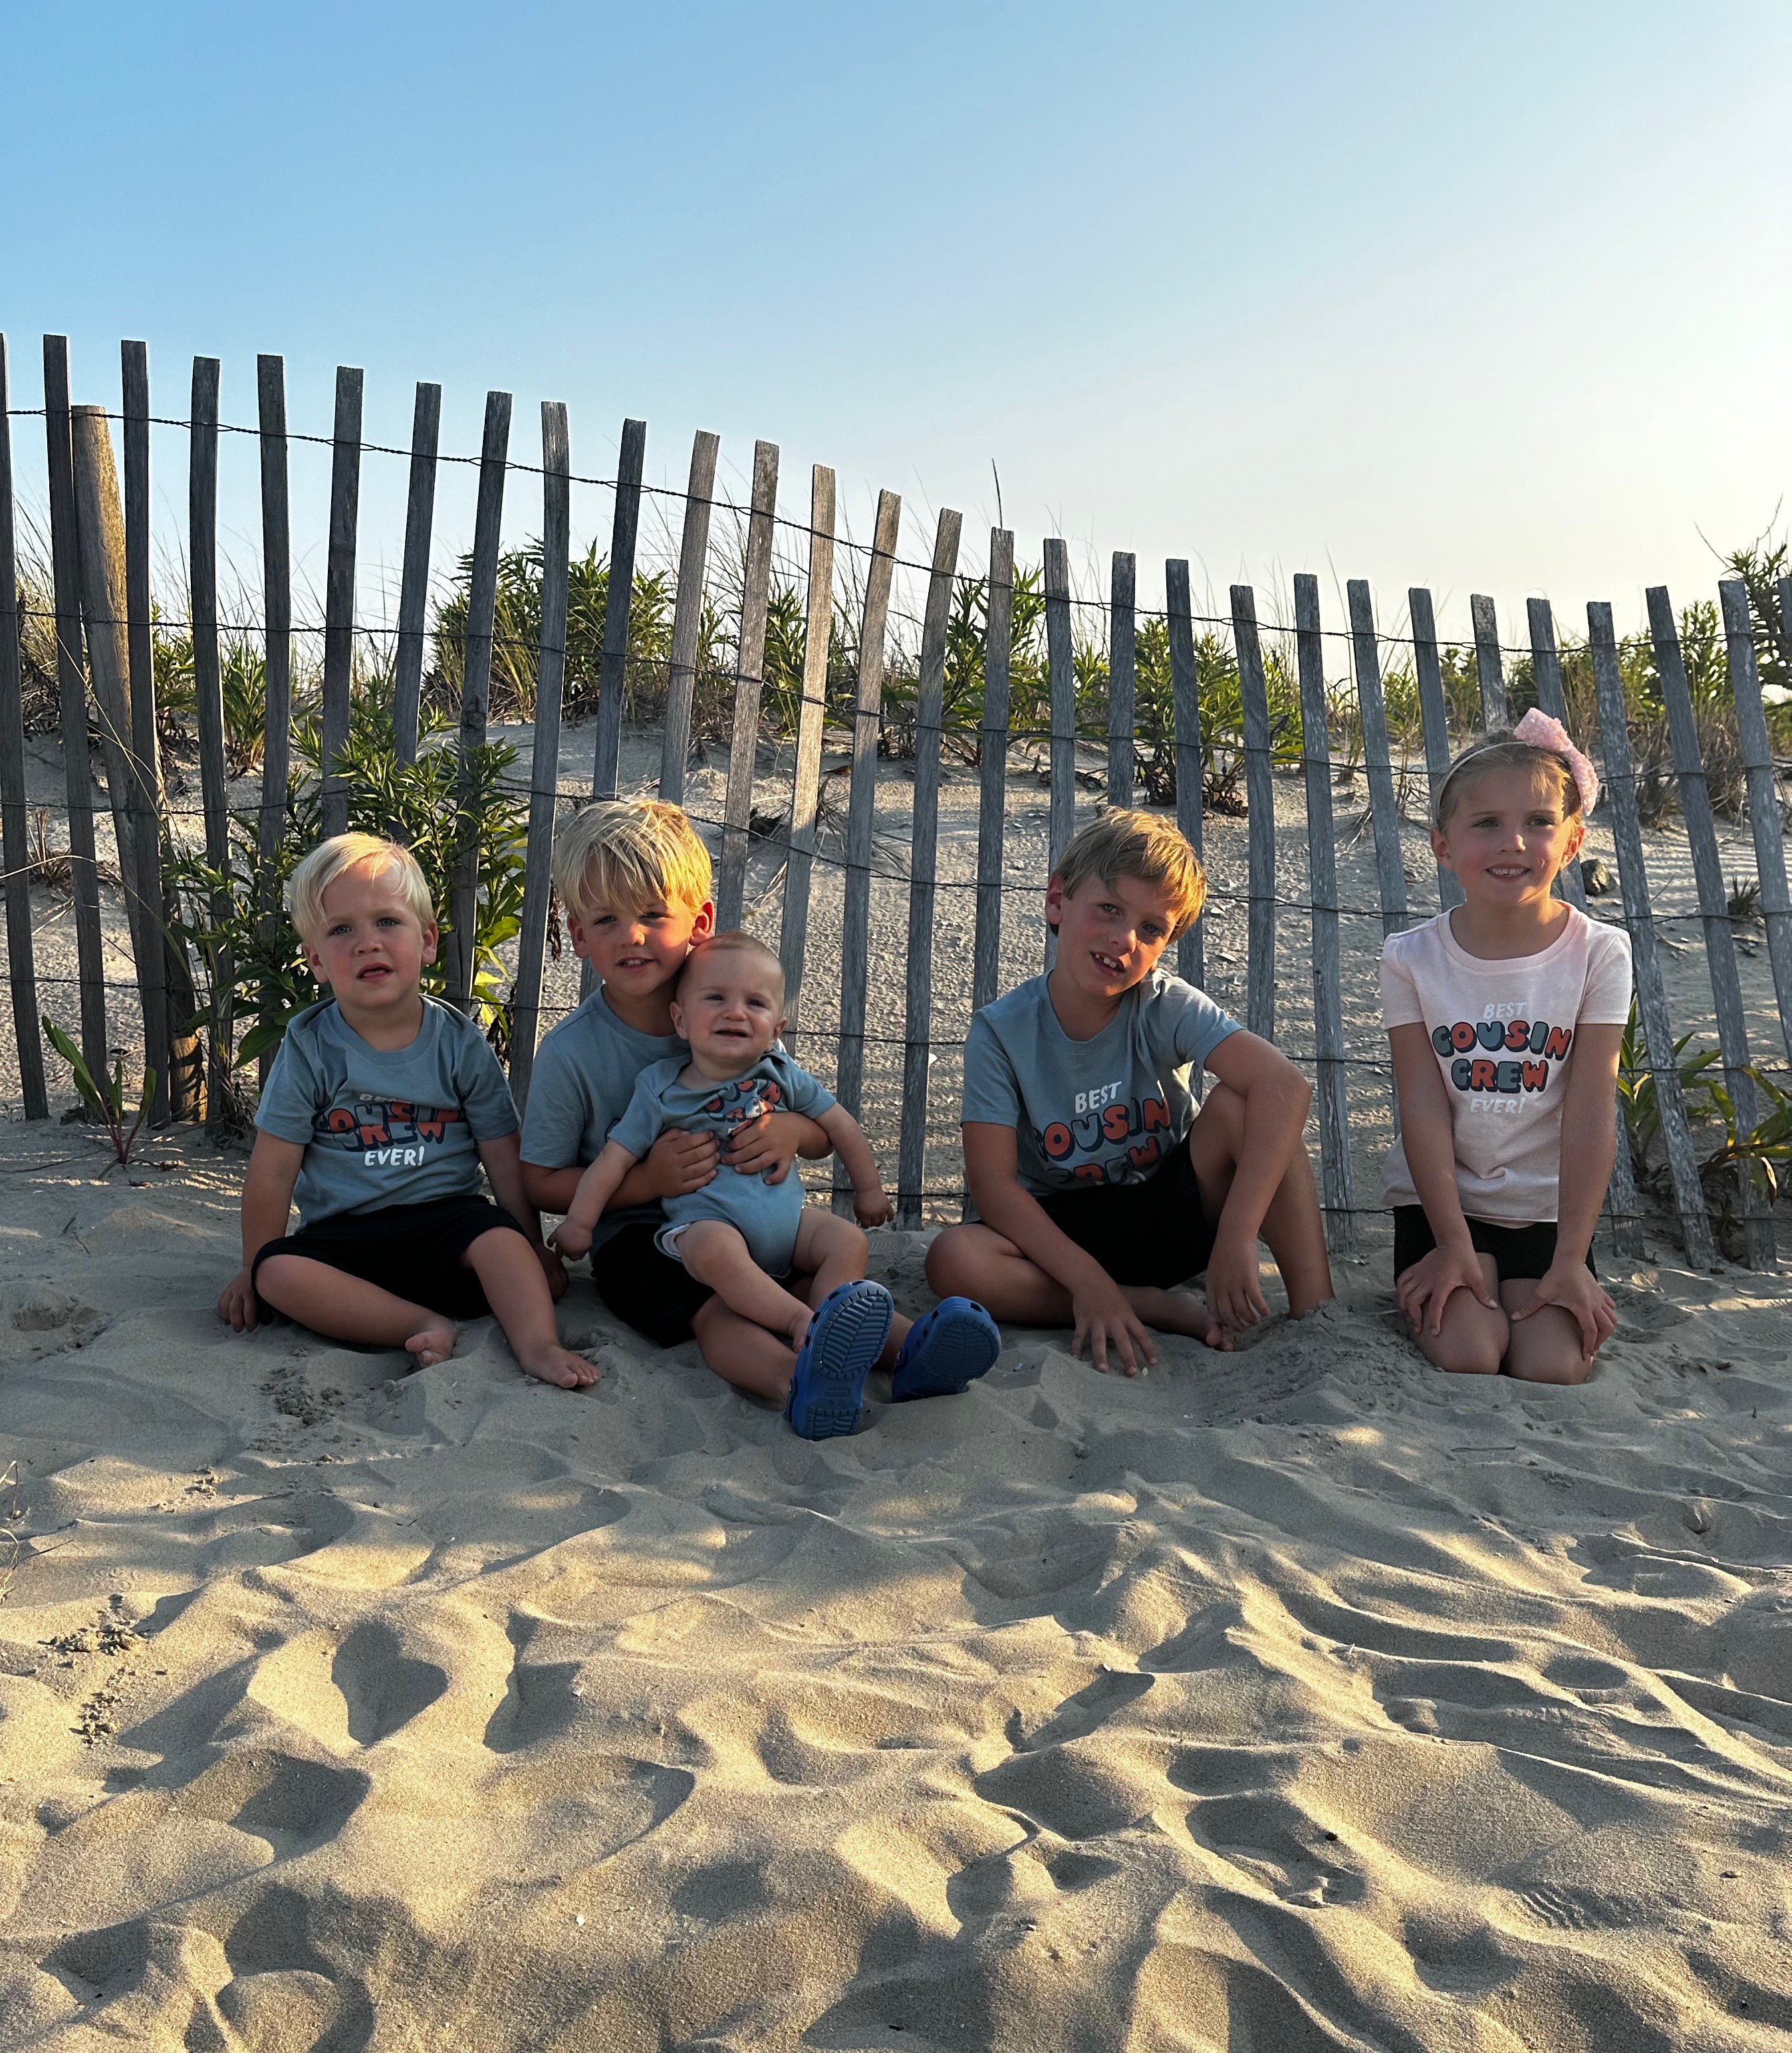 The four cousin princes and their princess cousin posing for a photo in between beach days in Ocean City, NJ.